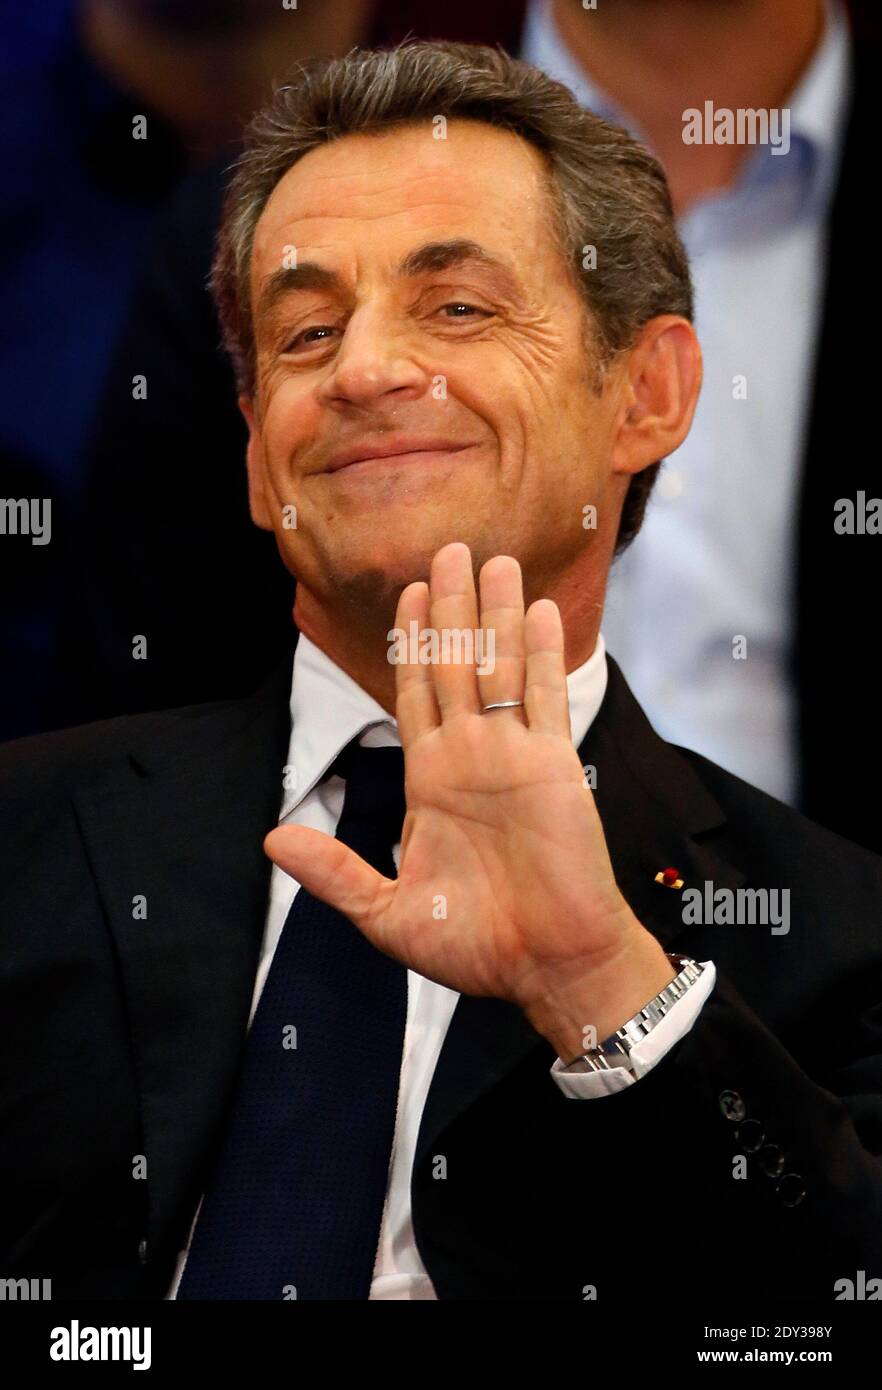 Former President Nicolas Sarkozy, who is a candidate for the leadership of the opposition rightist UMP party, answers questions on October 8, 2014 during a public meeting in the southern city of Toulouse, France. Photo by Patrick Bernard/ABACAPRESS.COM Stock Photo